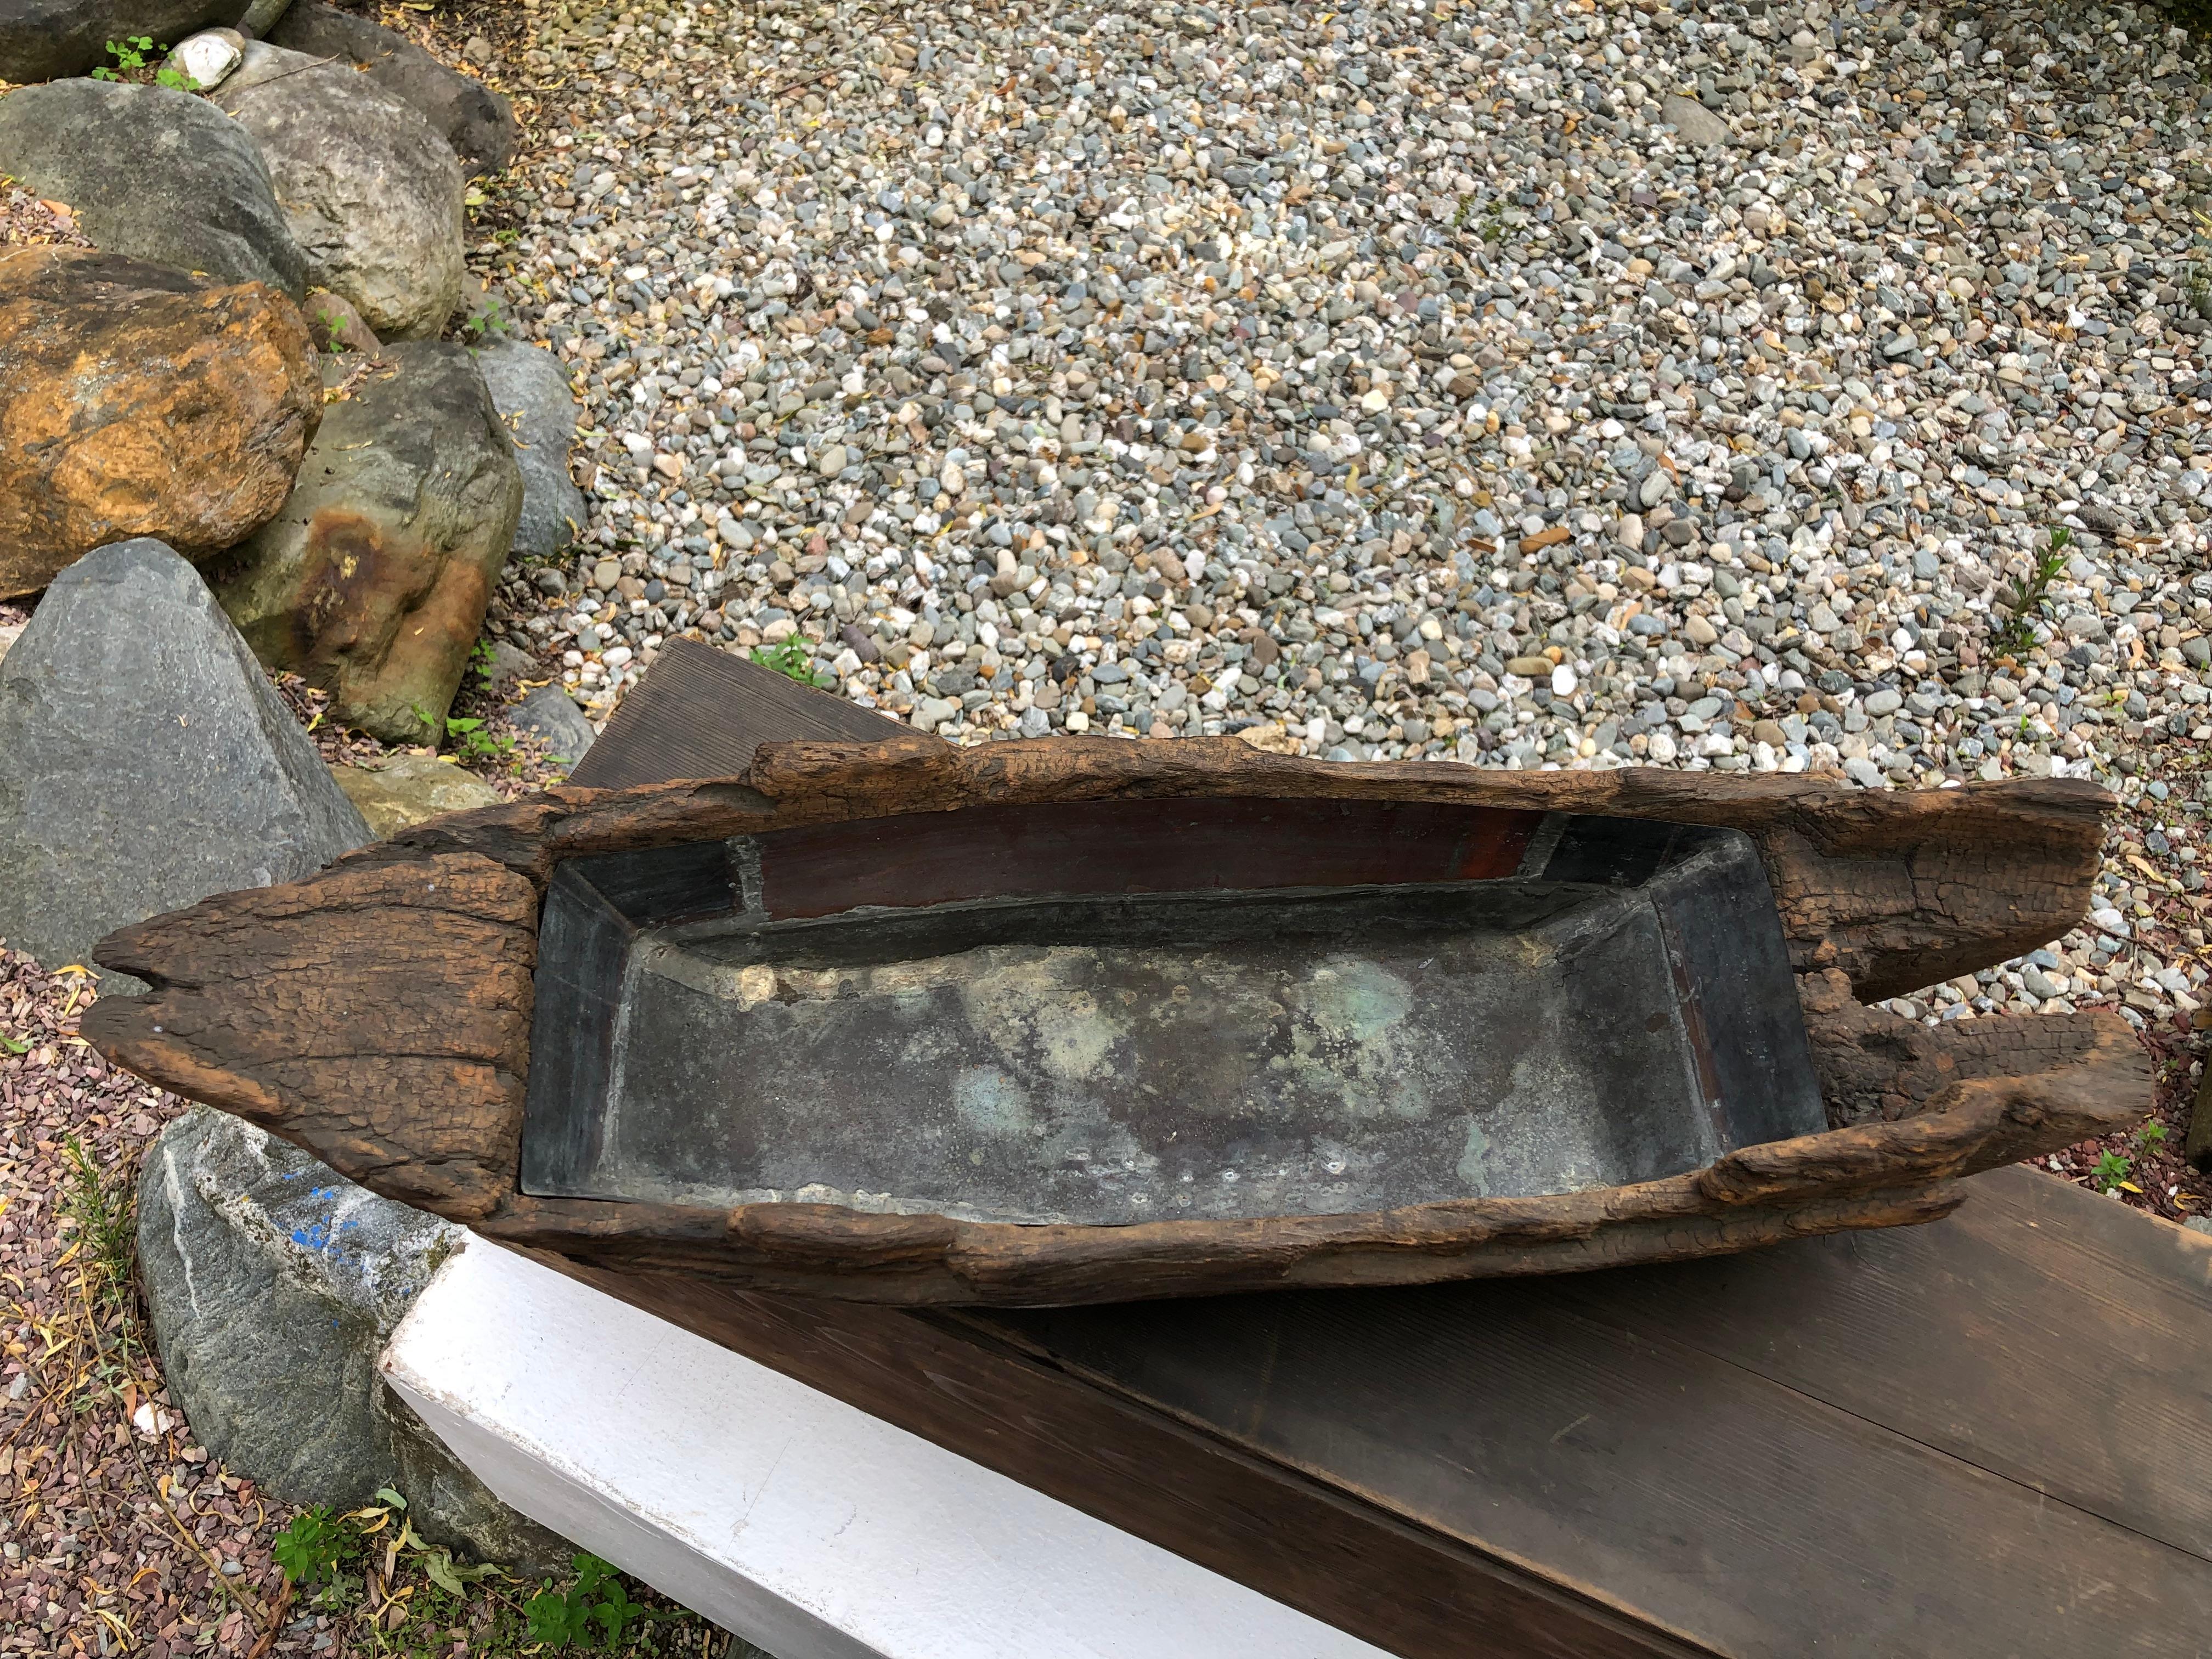 Japanese Big Antique Hand Carved Ikenobu Boat 19th Century, Boxed Hard to Find 1